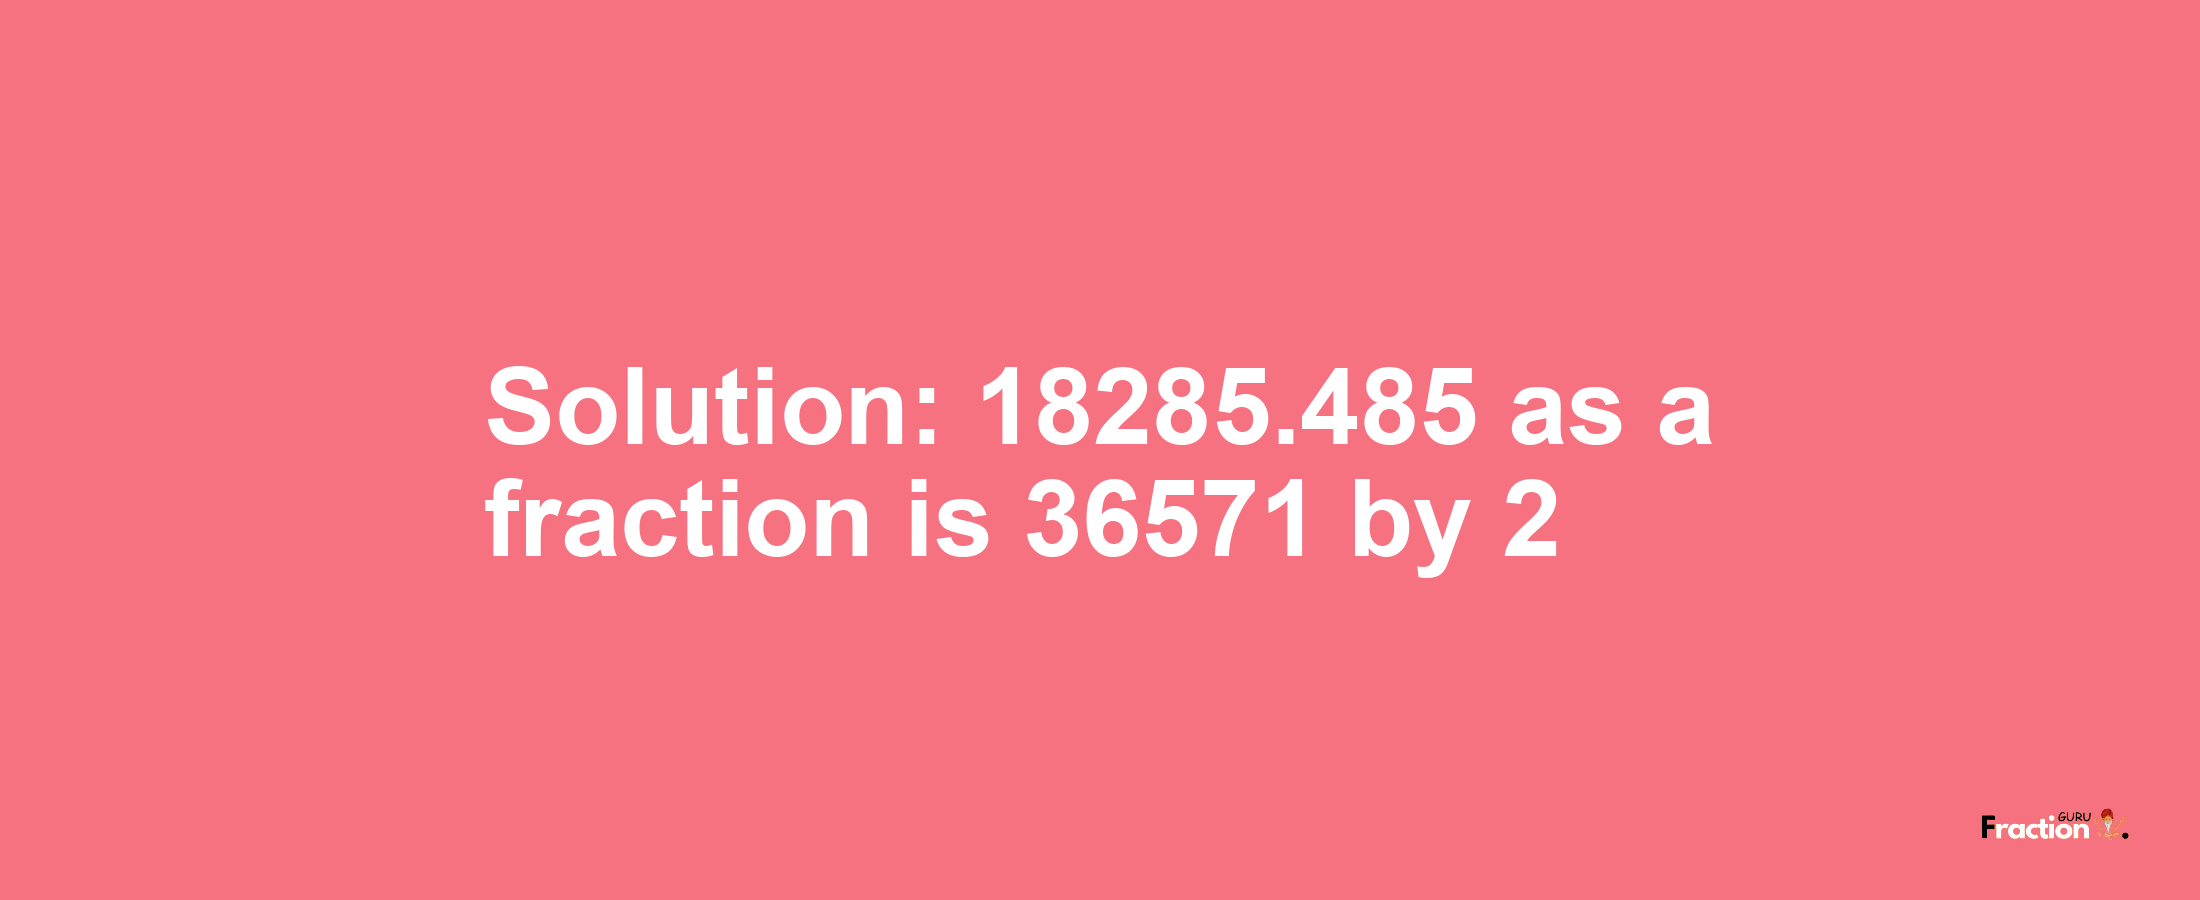 Solution:18285.485 as a fraction is 36571/2